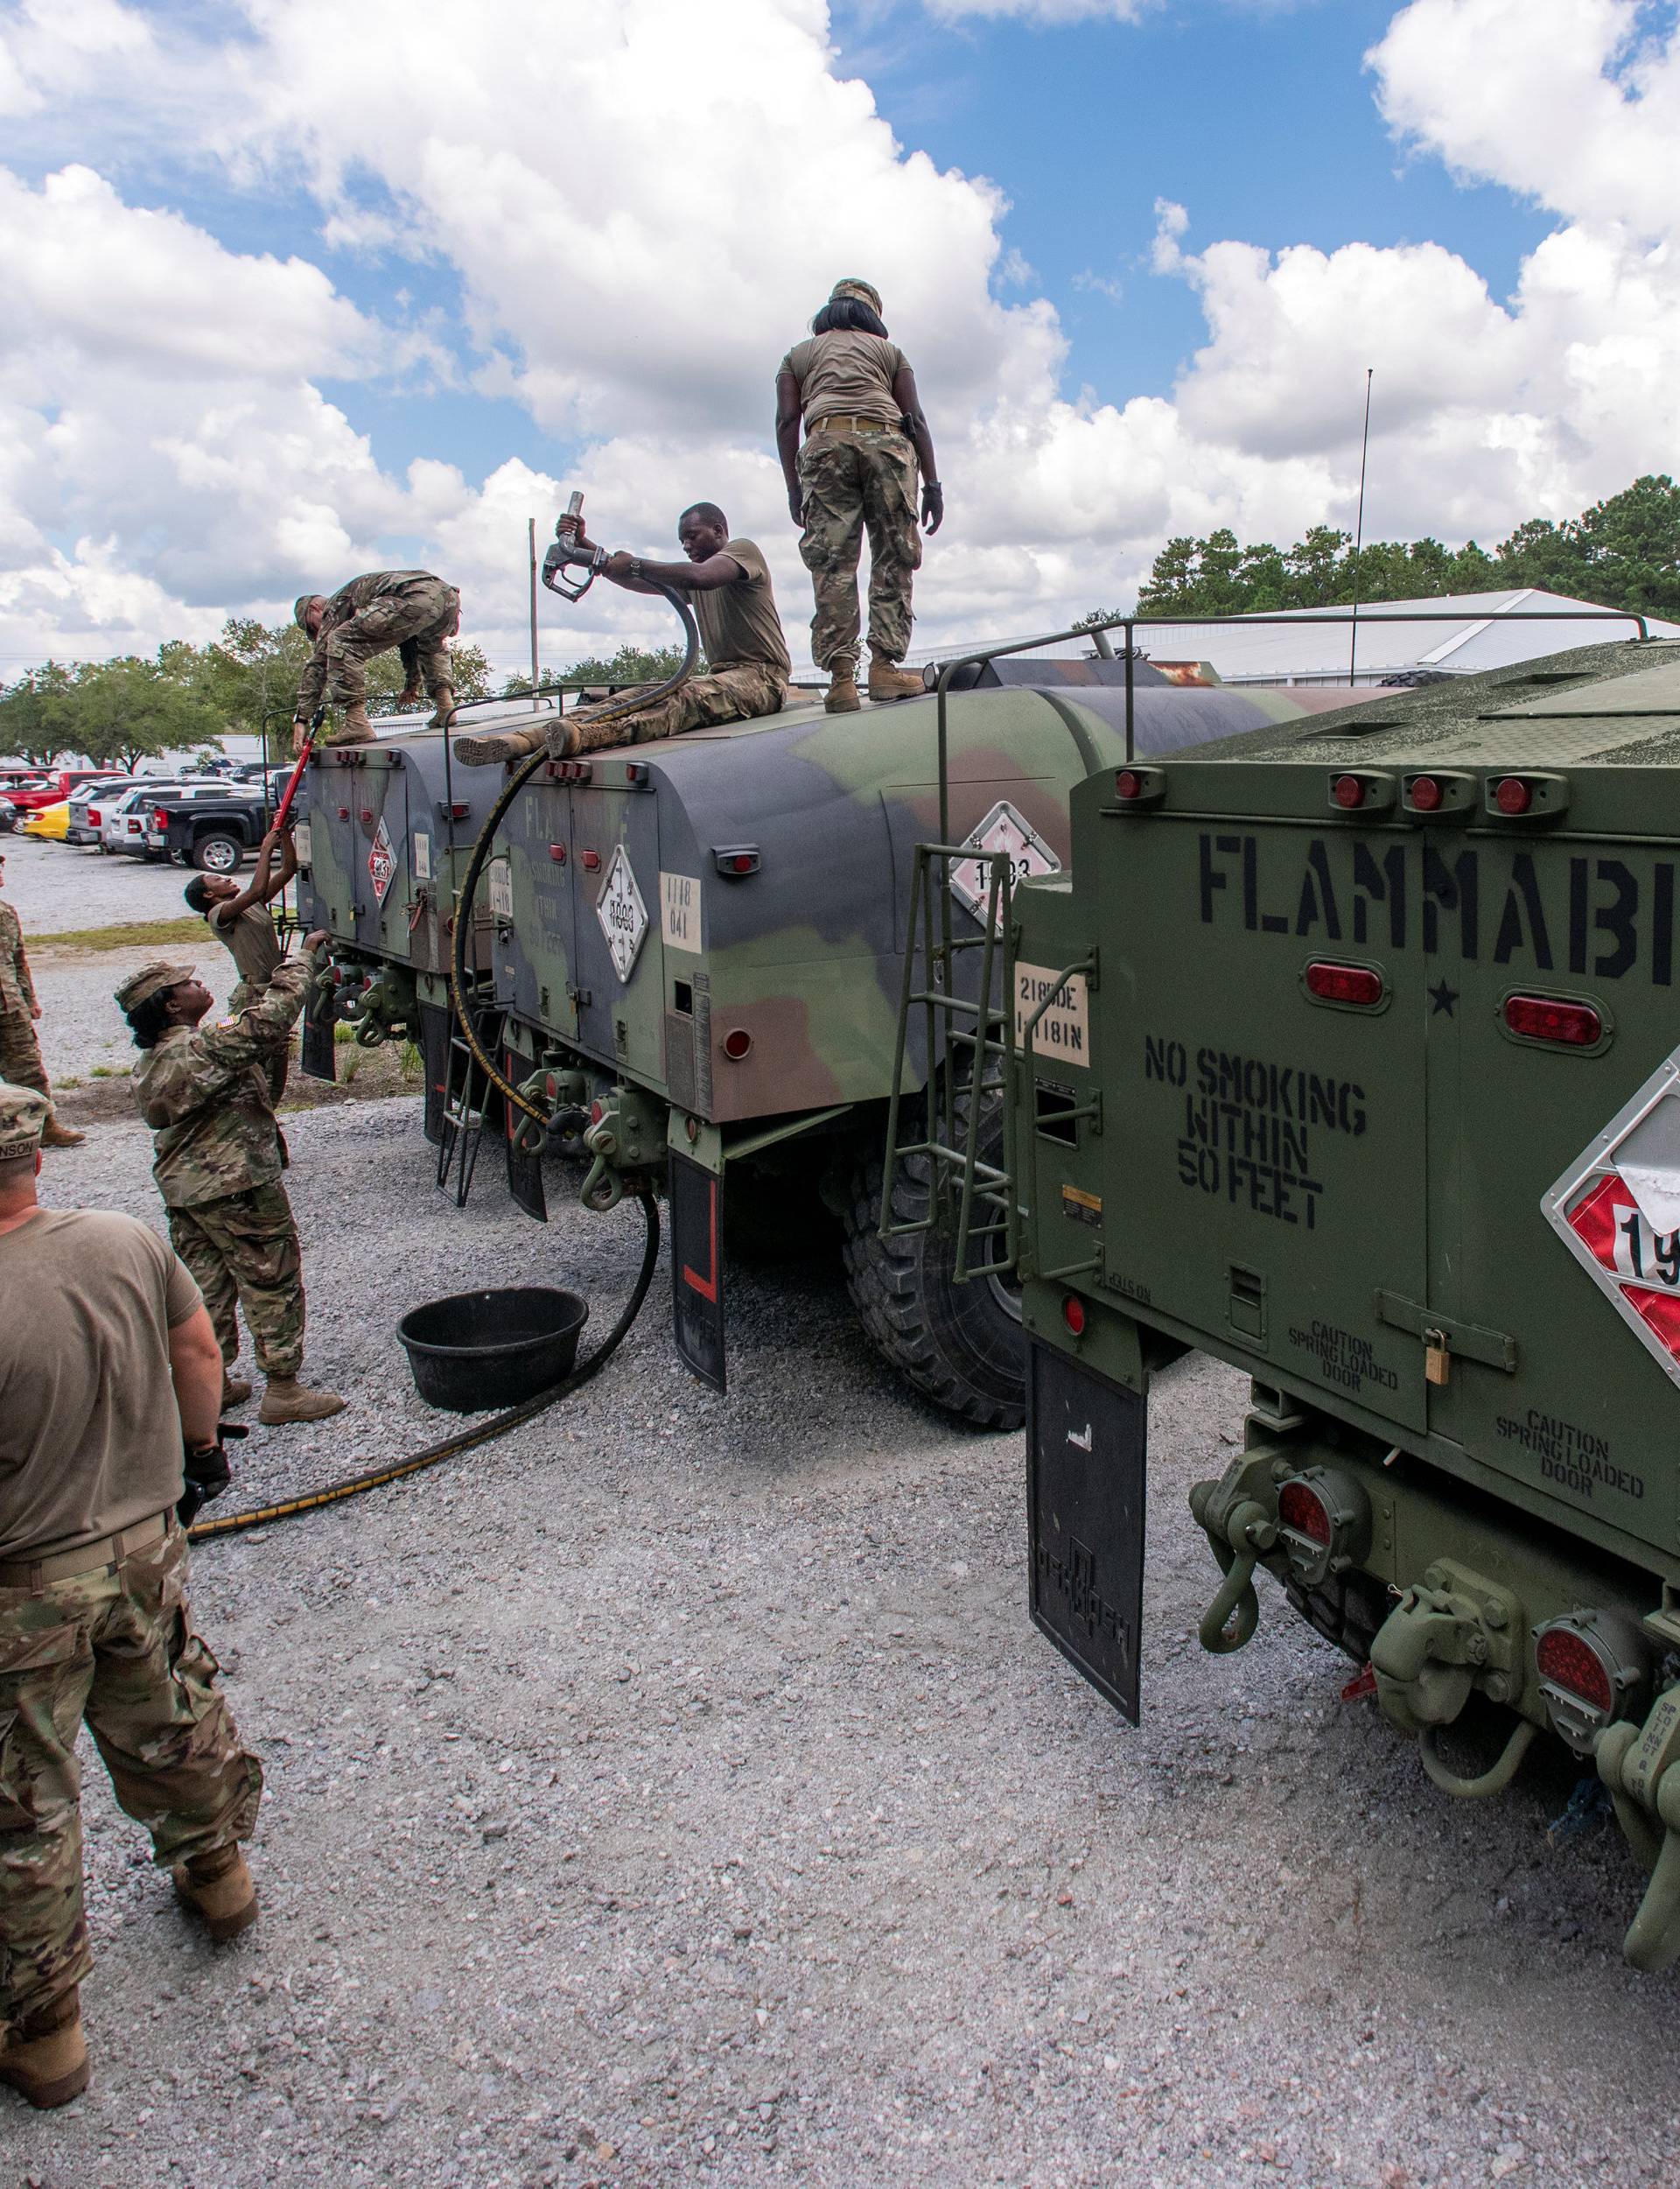 South Carolina National Guard soldiers transfer bulk diesel fuel into fuel tanker trucks for distribution in advance of Hurricane Florence